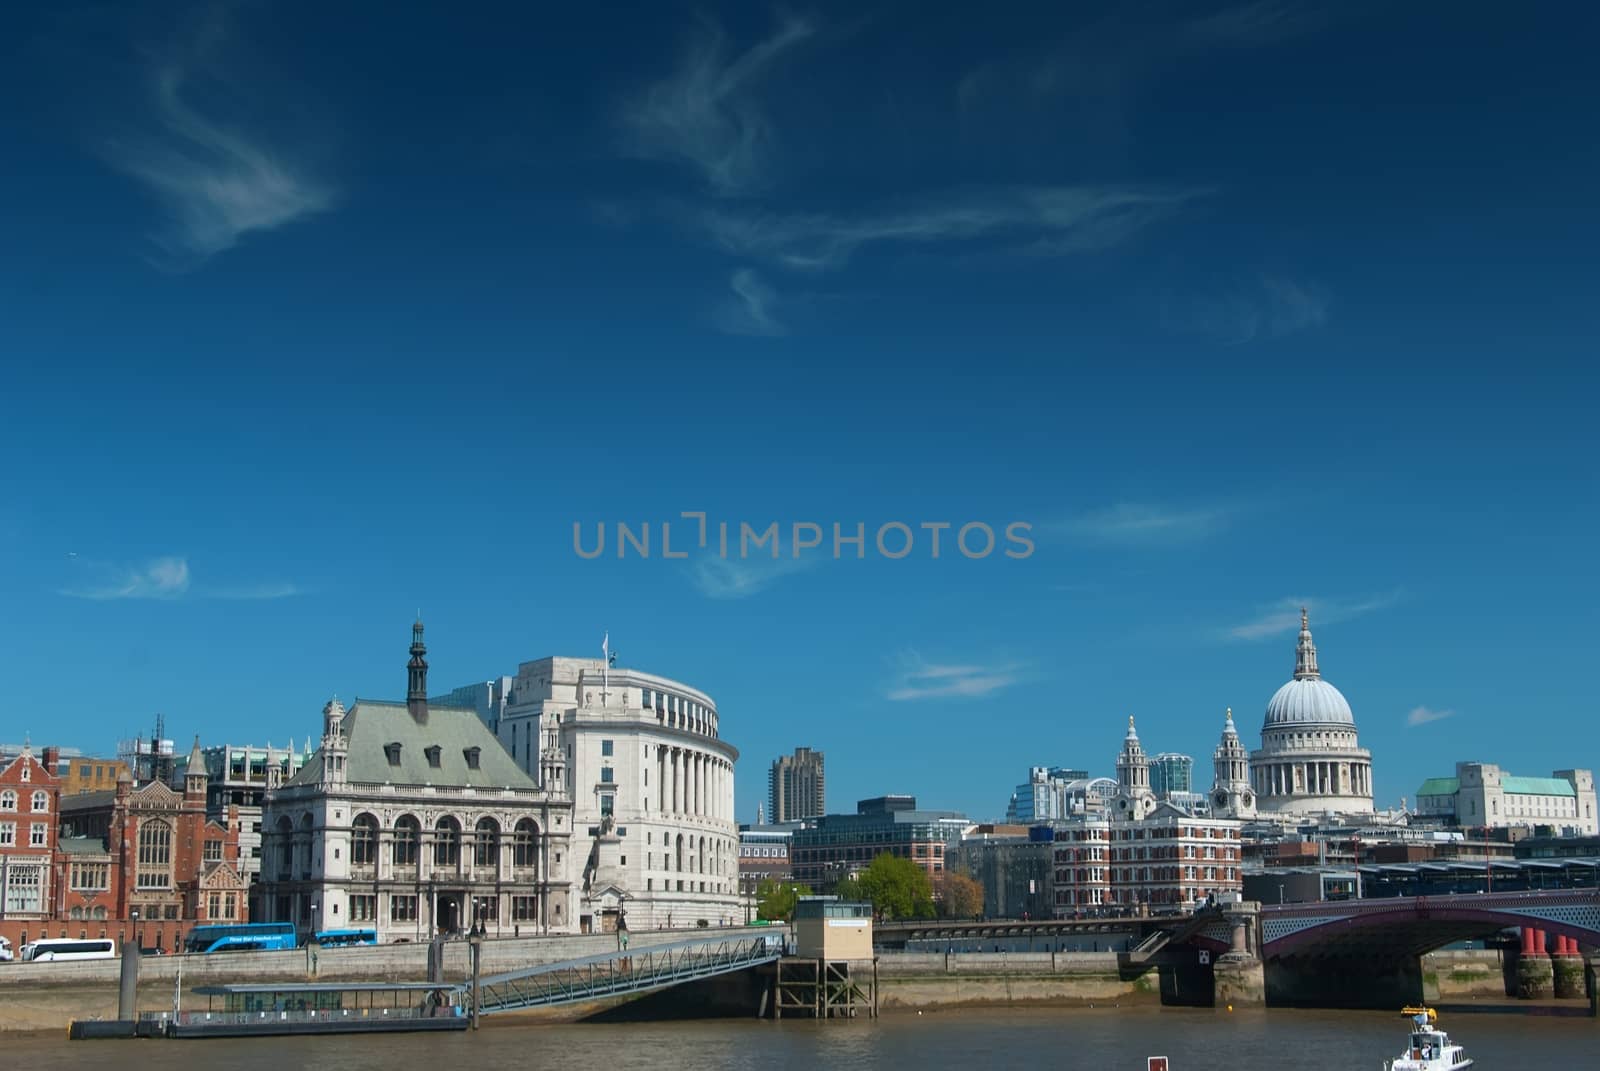 City of London, from across the River Thames, London, England, UK, Europe by mitakag